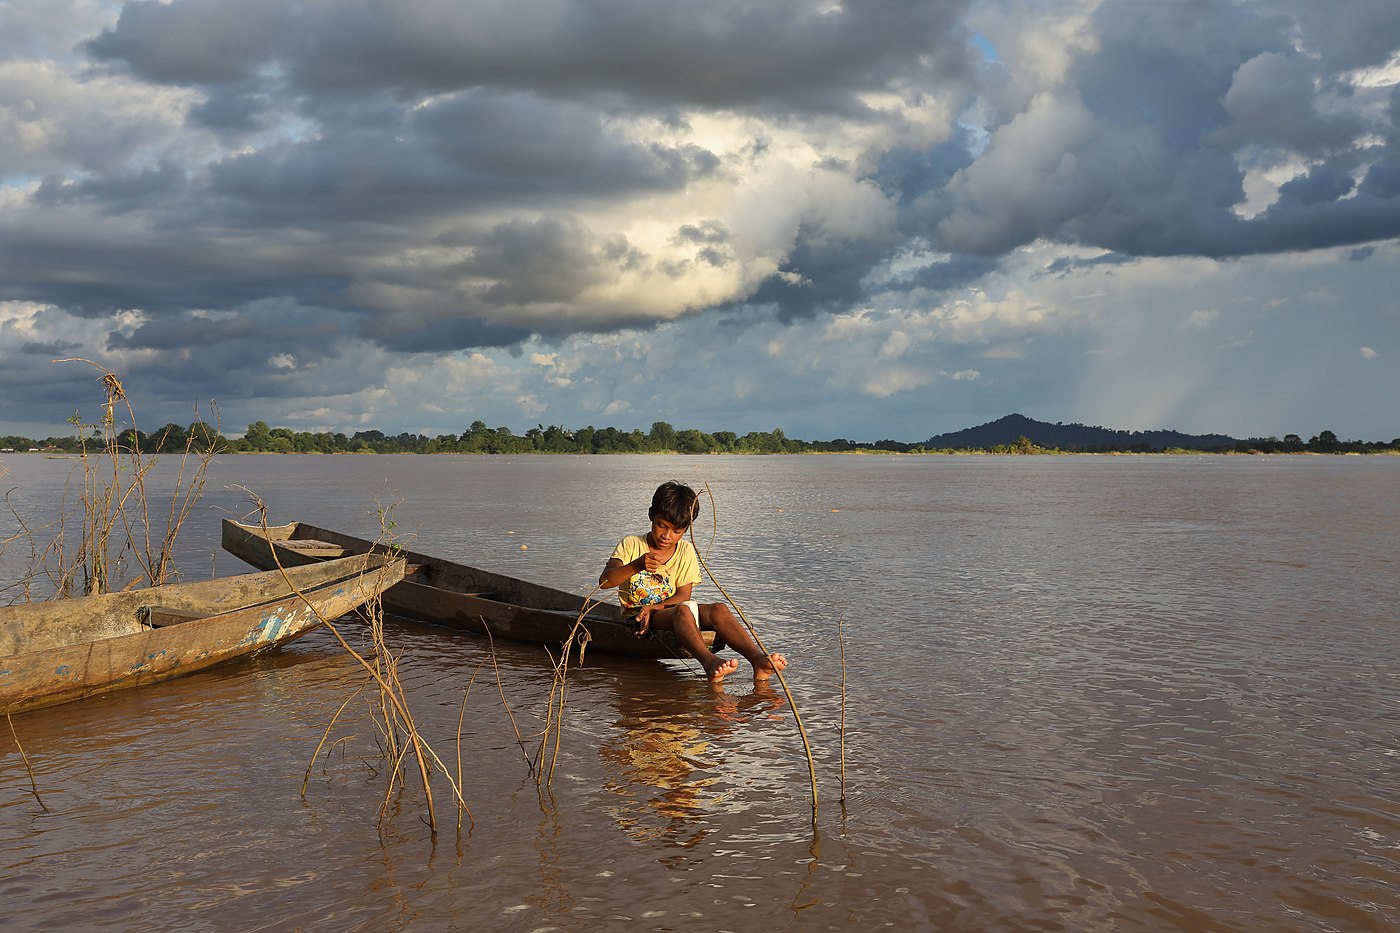 Boy sitting on his pirogue, fishing in the Mekong